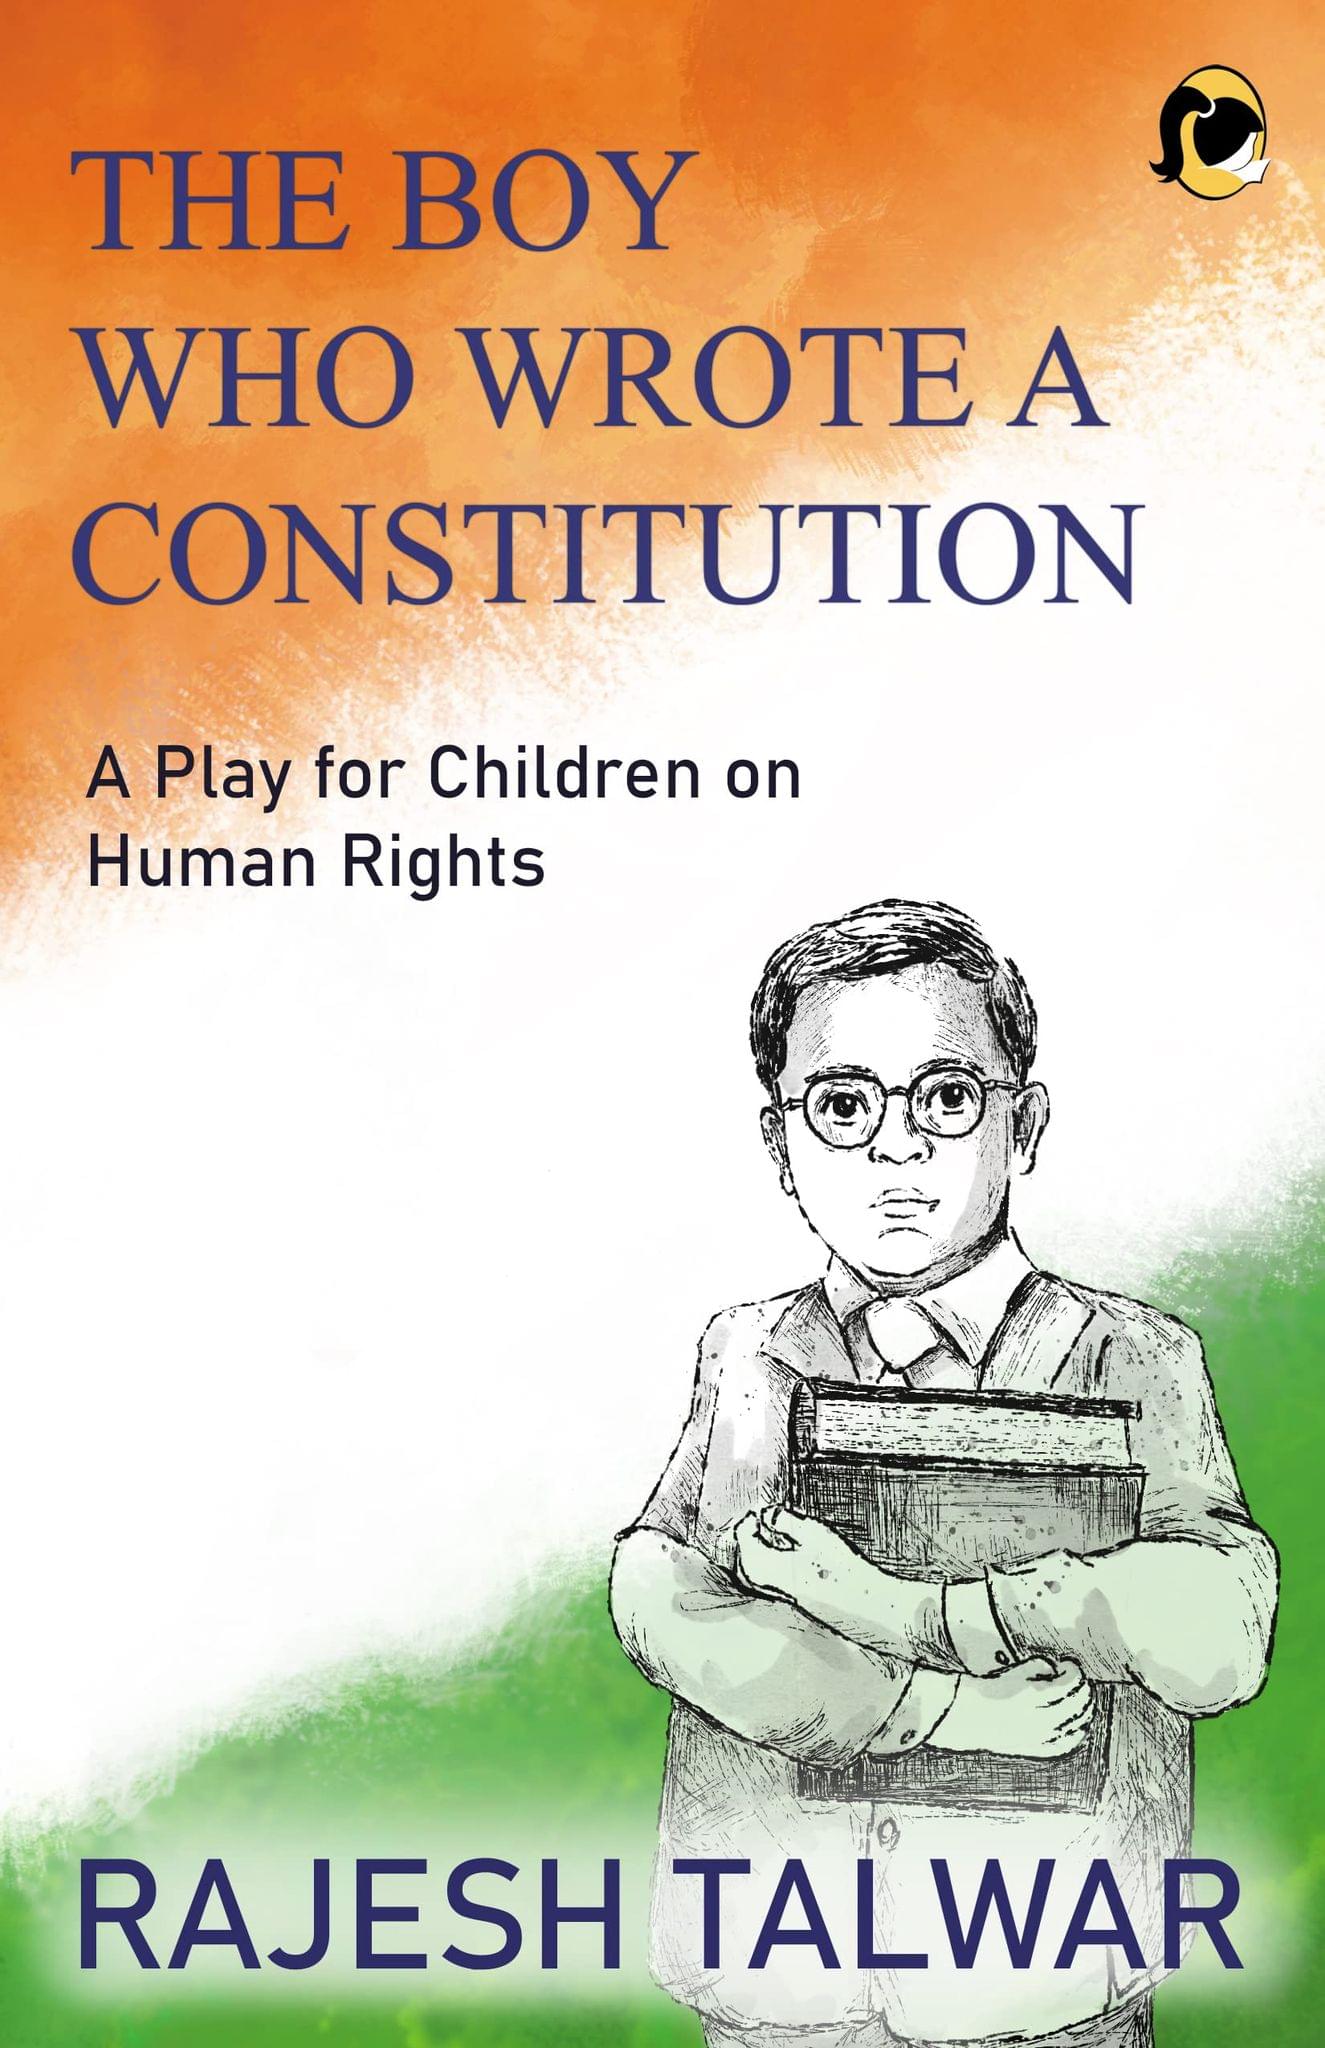 The Boy Who Wrote a Constitution: A Play for Children on Human Rights